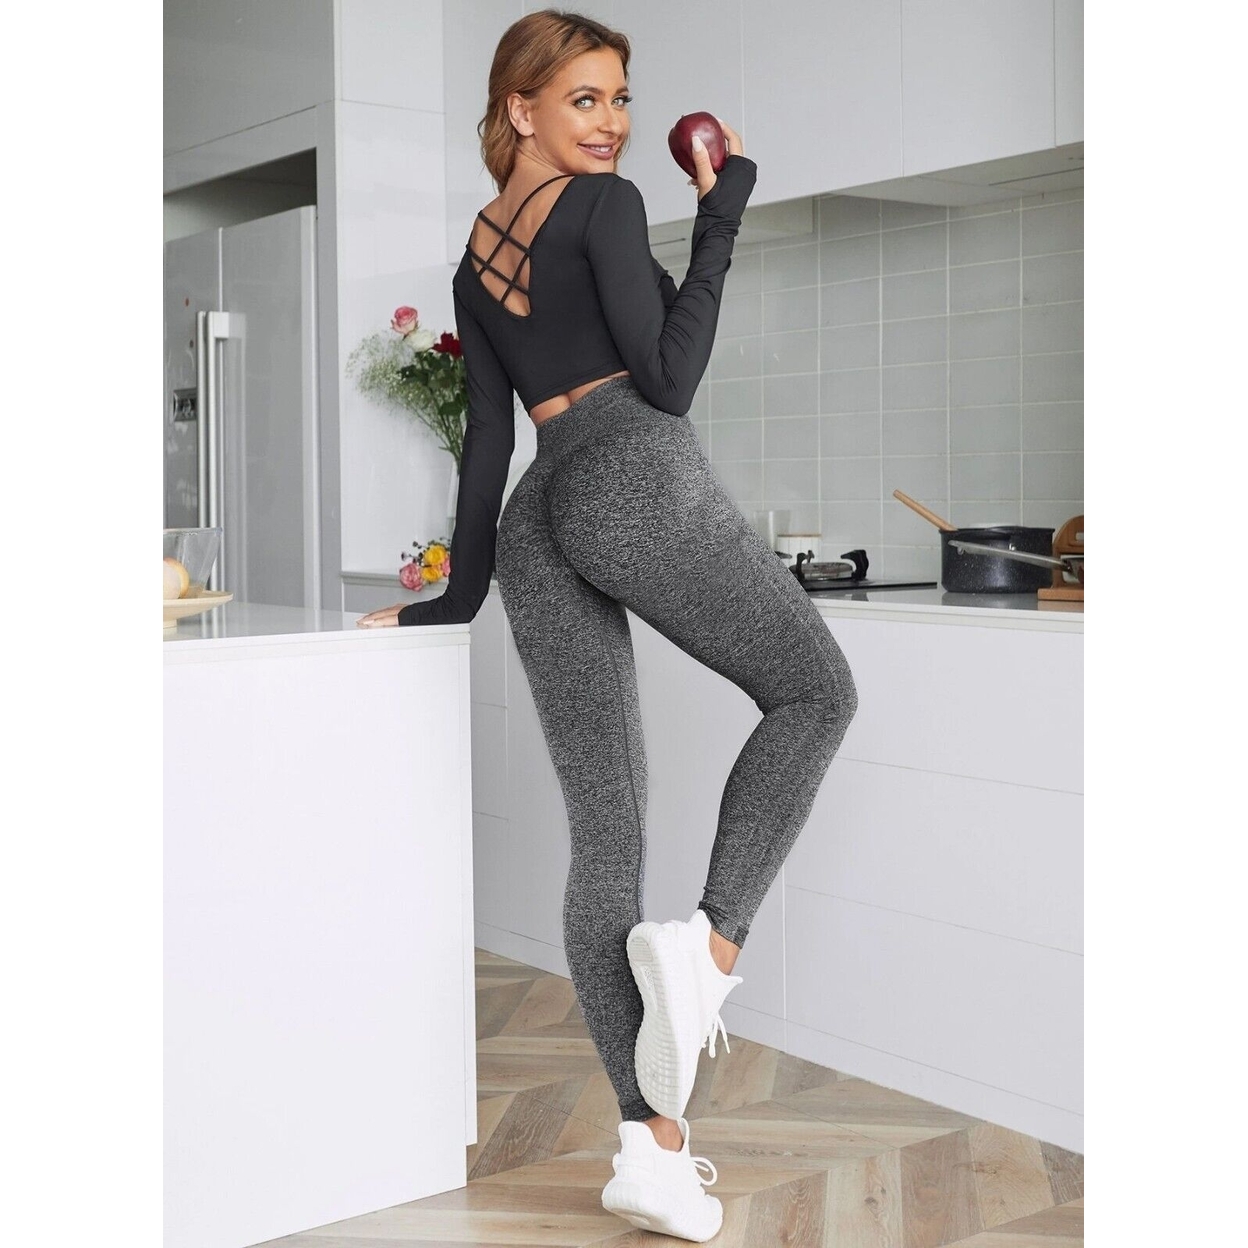 2-Pack Women's Warm High Waist Winter Fleece Lined Stretch Full Length Leggings - Charcoal/charcoal, Large